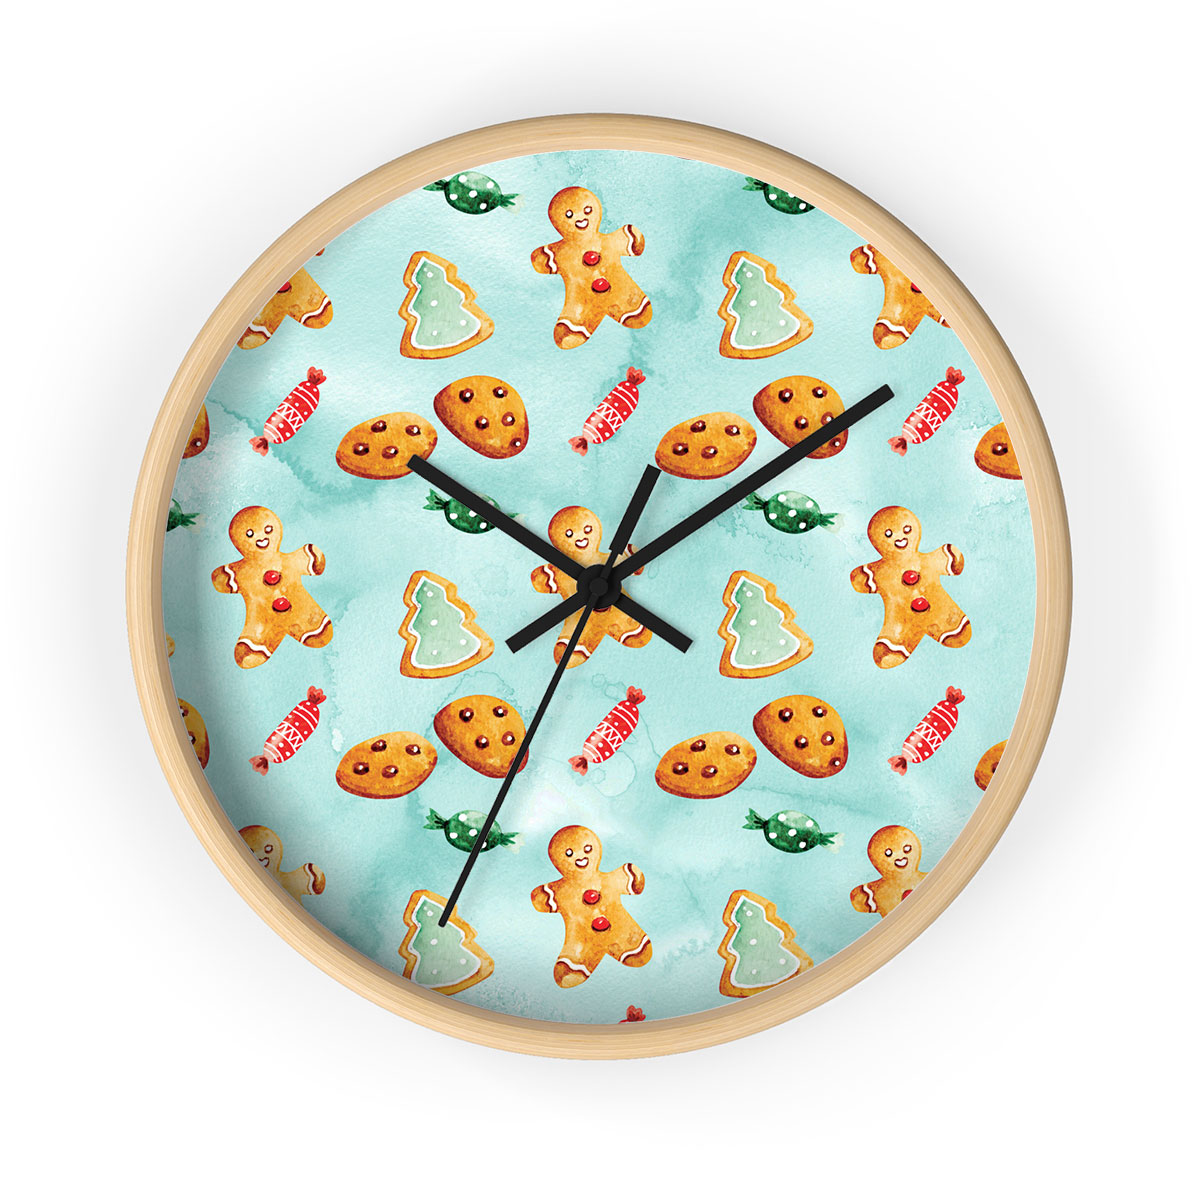 Gingerbread, Christmas Candy, Gingerbread Man Cookies Printed Wooden Wall Clock